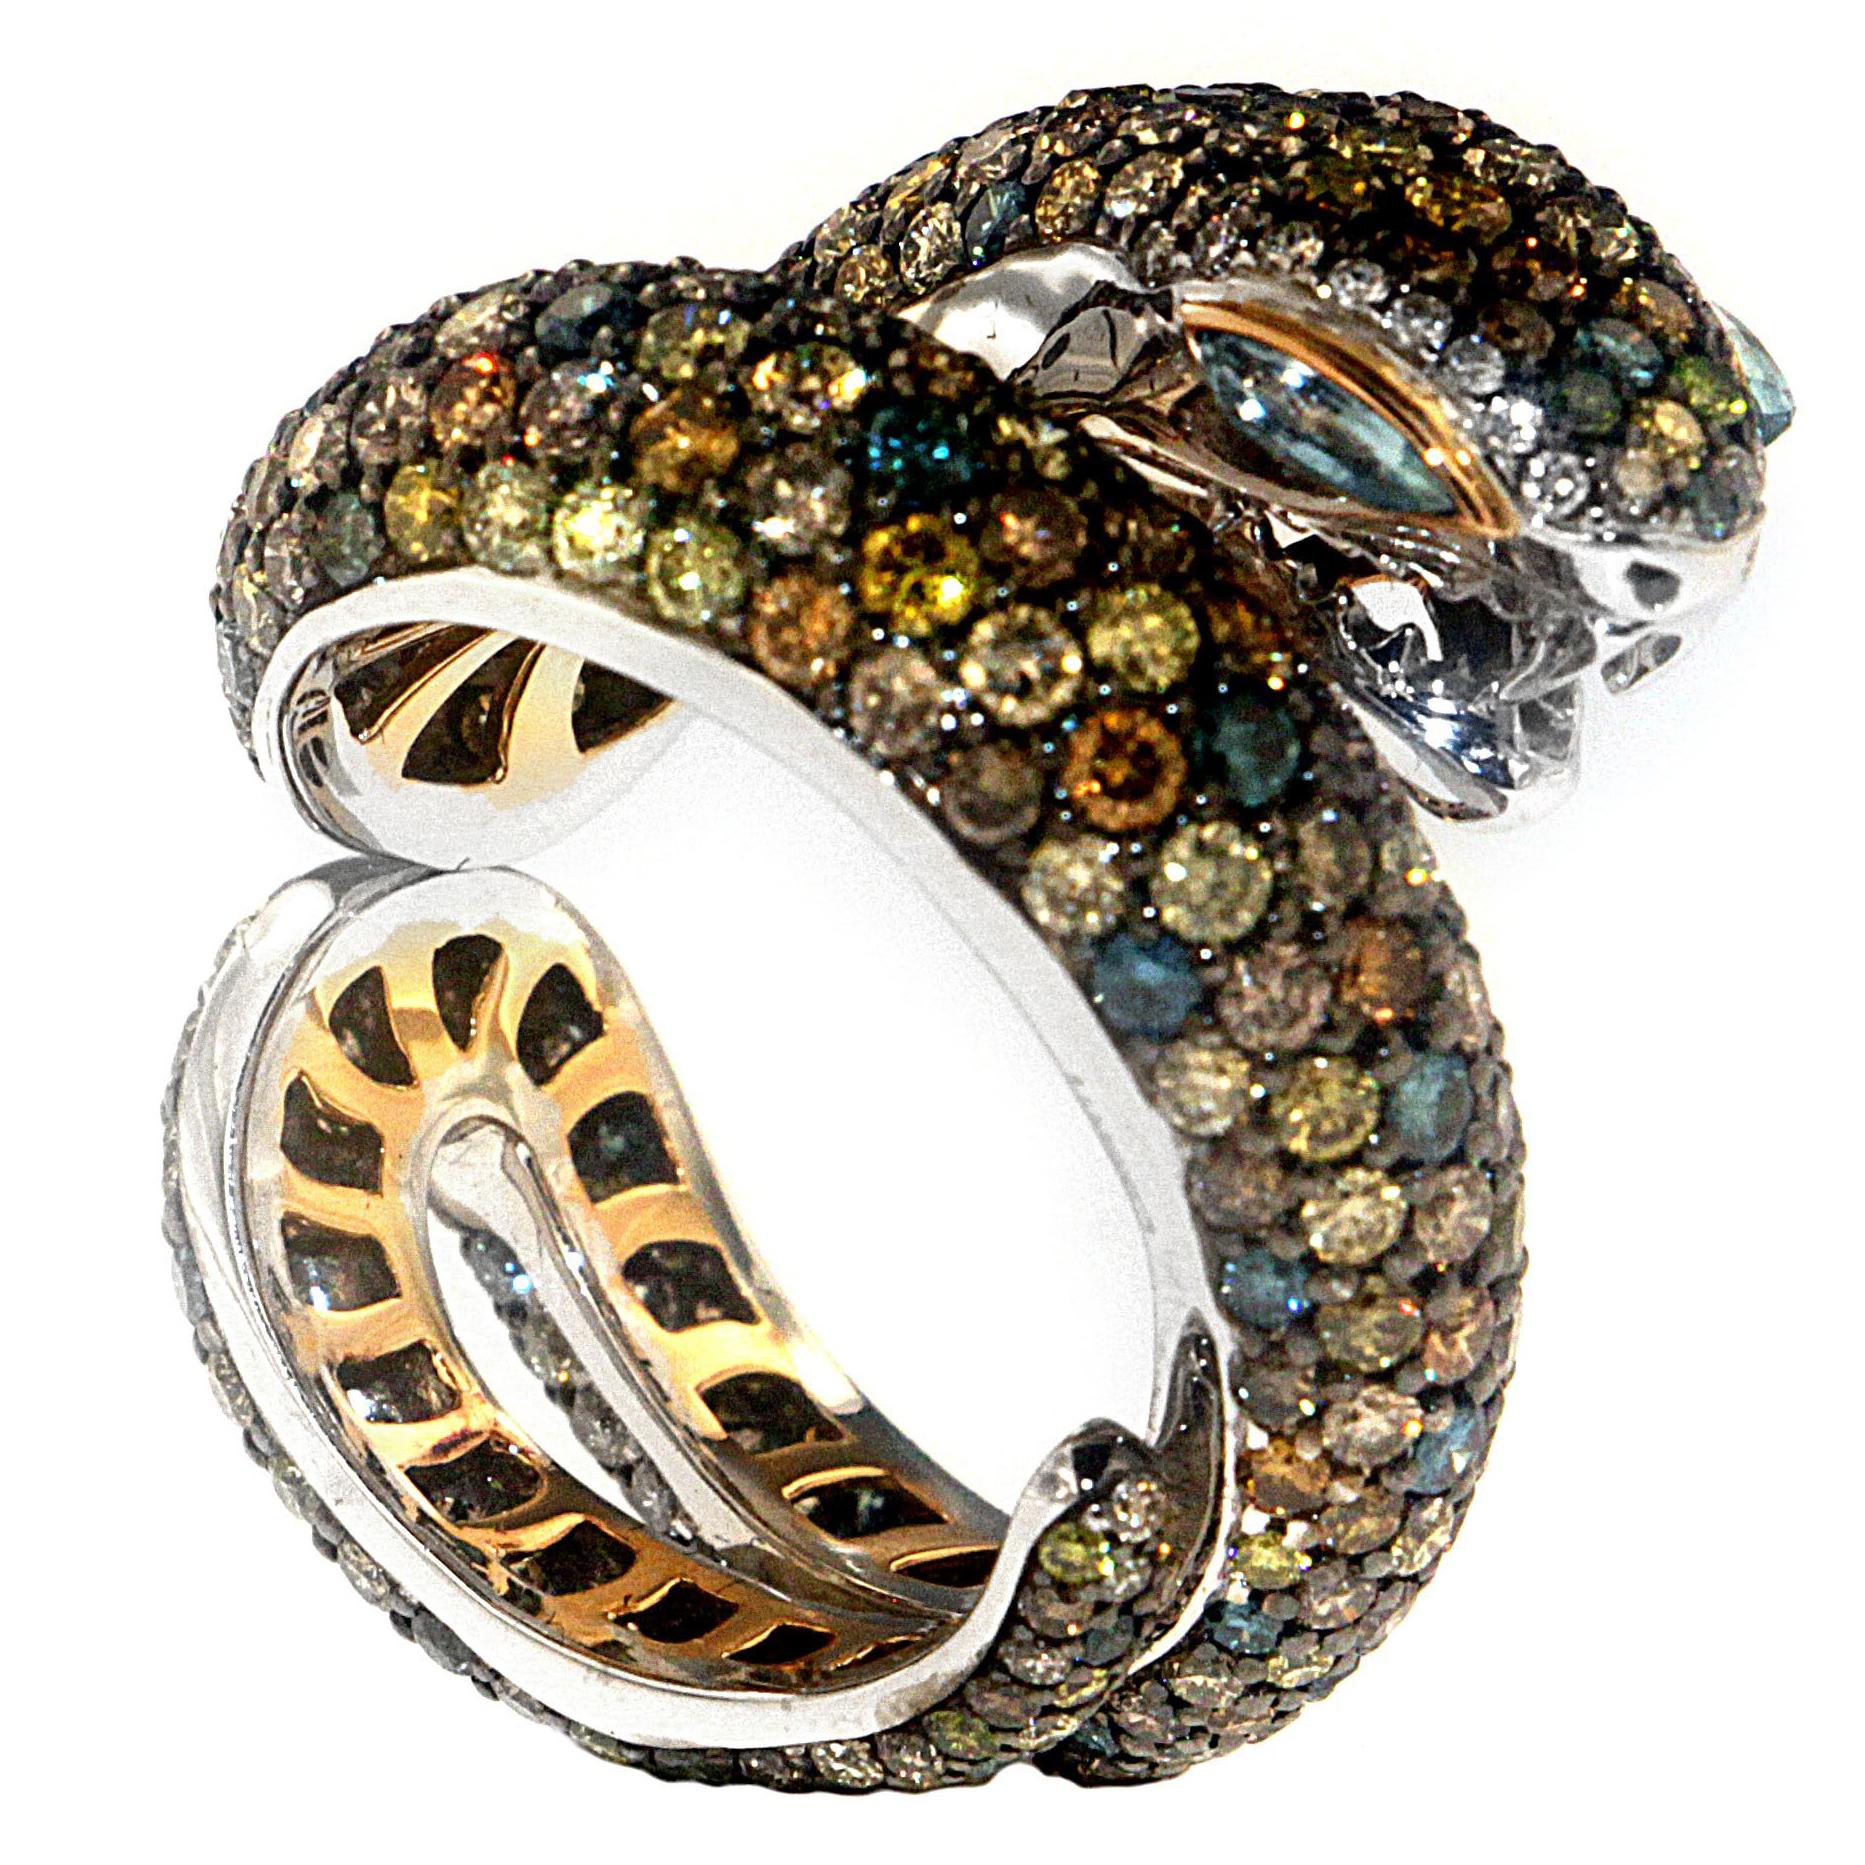 Zorab Creation Multi-Colored Fancy Diamond 8.00 cts Sunbeam Snake Cocktail Ring For Sale